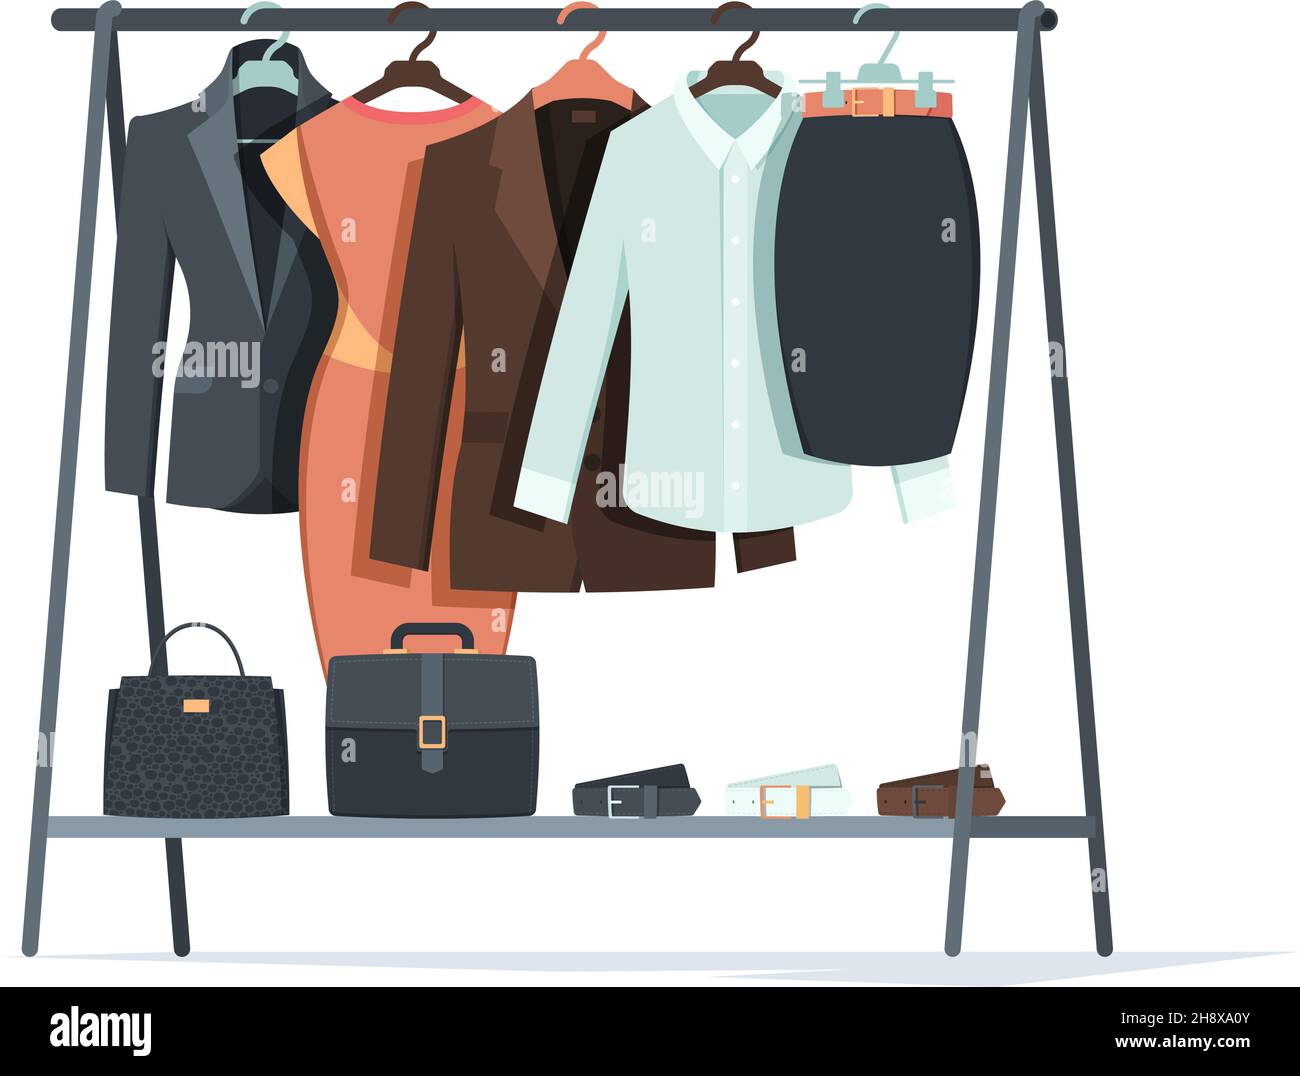 collection of shirts on hangers, men s fashion Stock Photo - Alamy